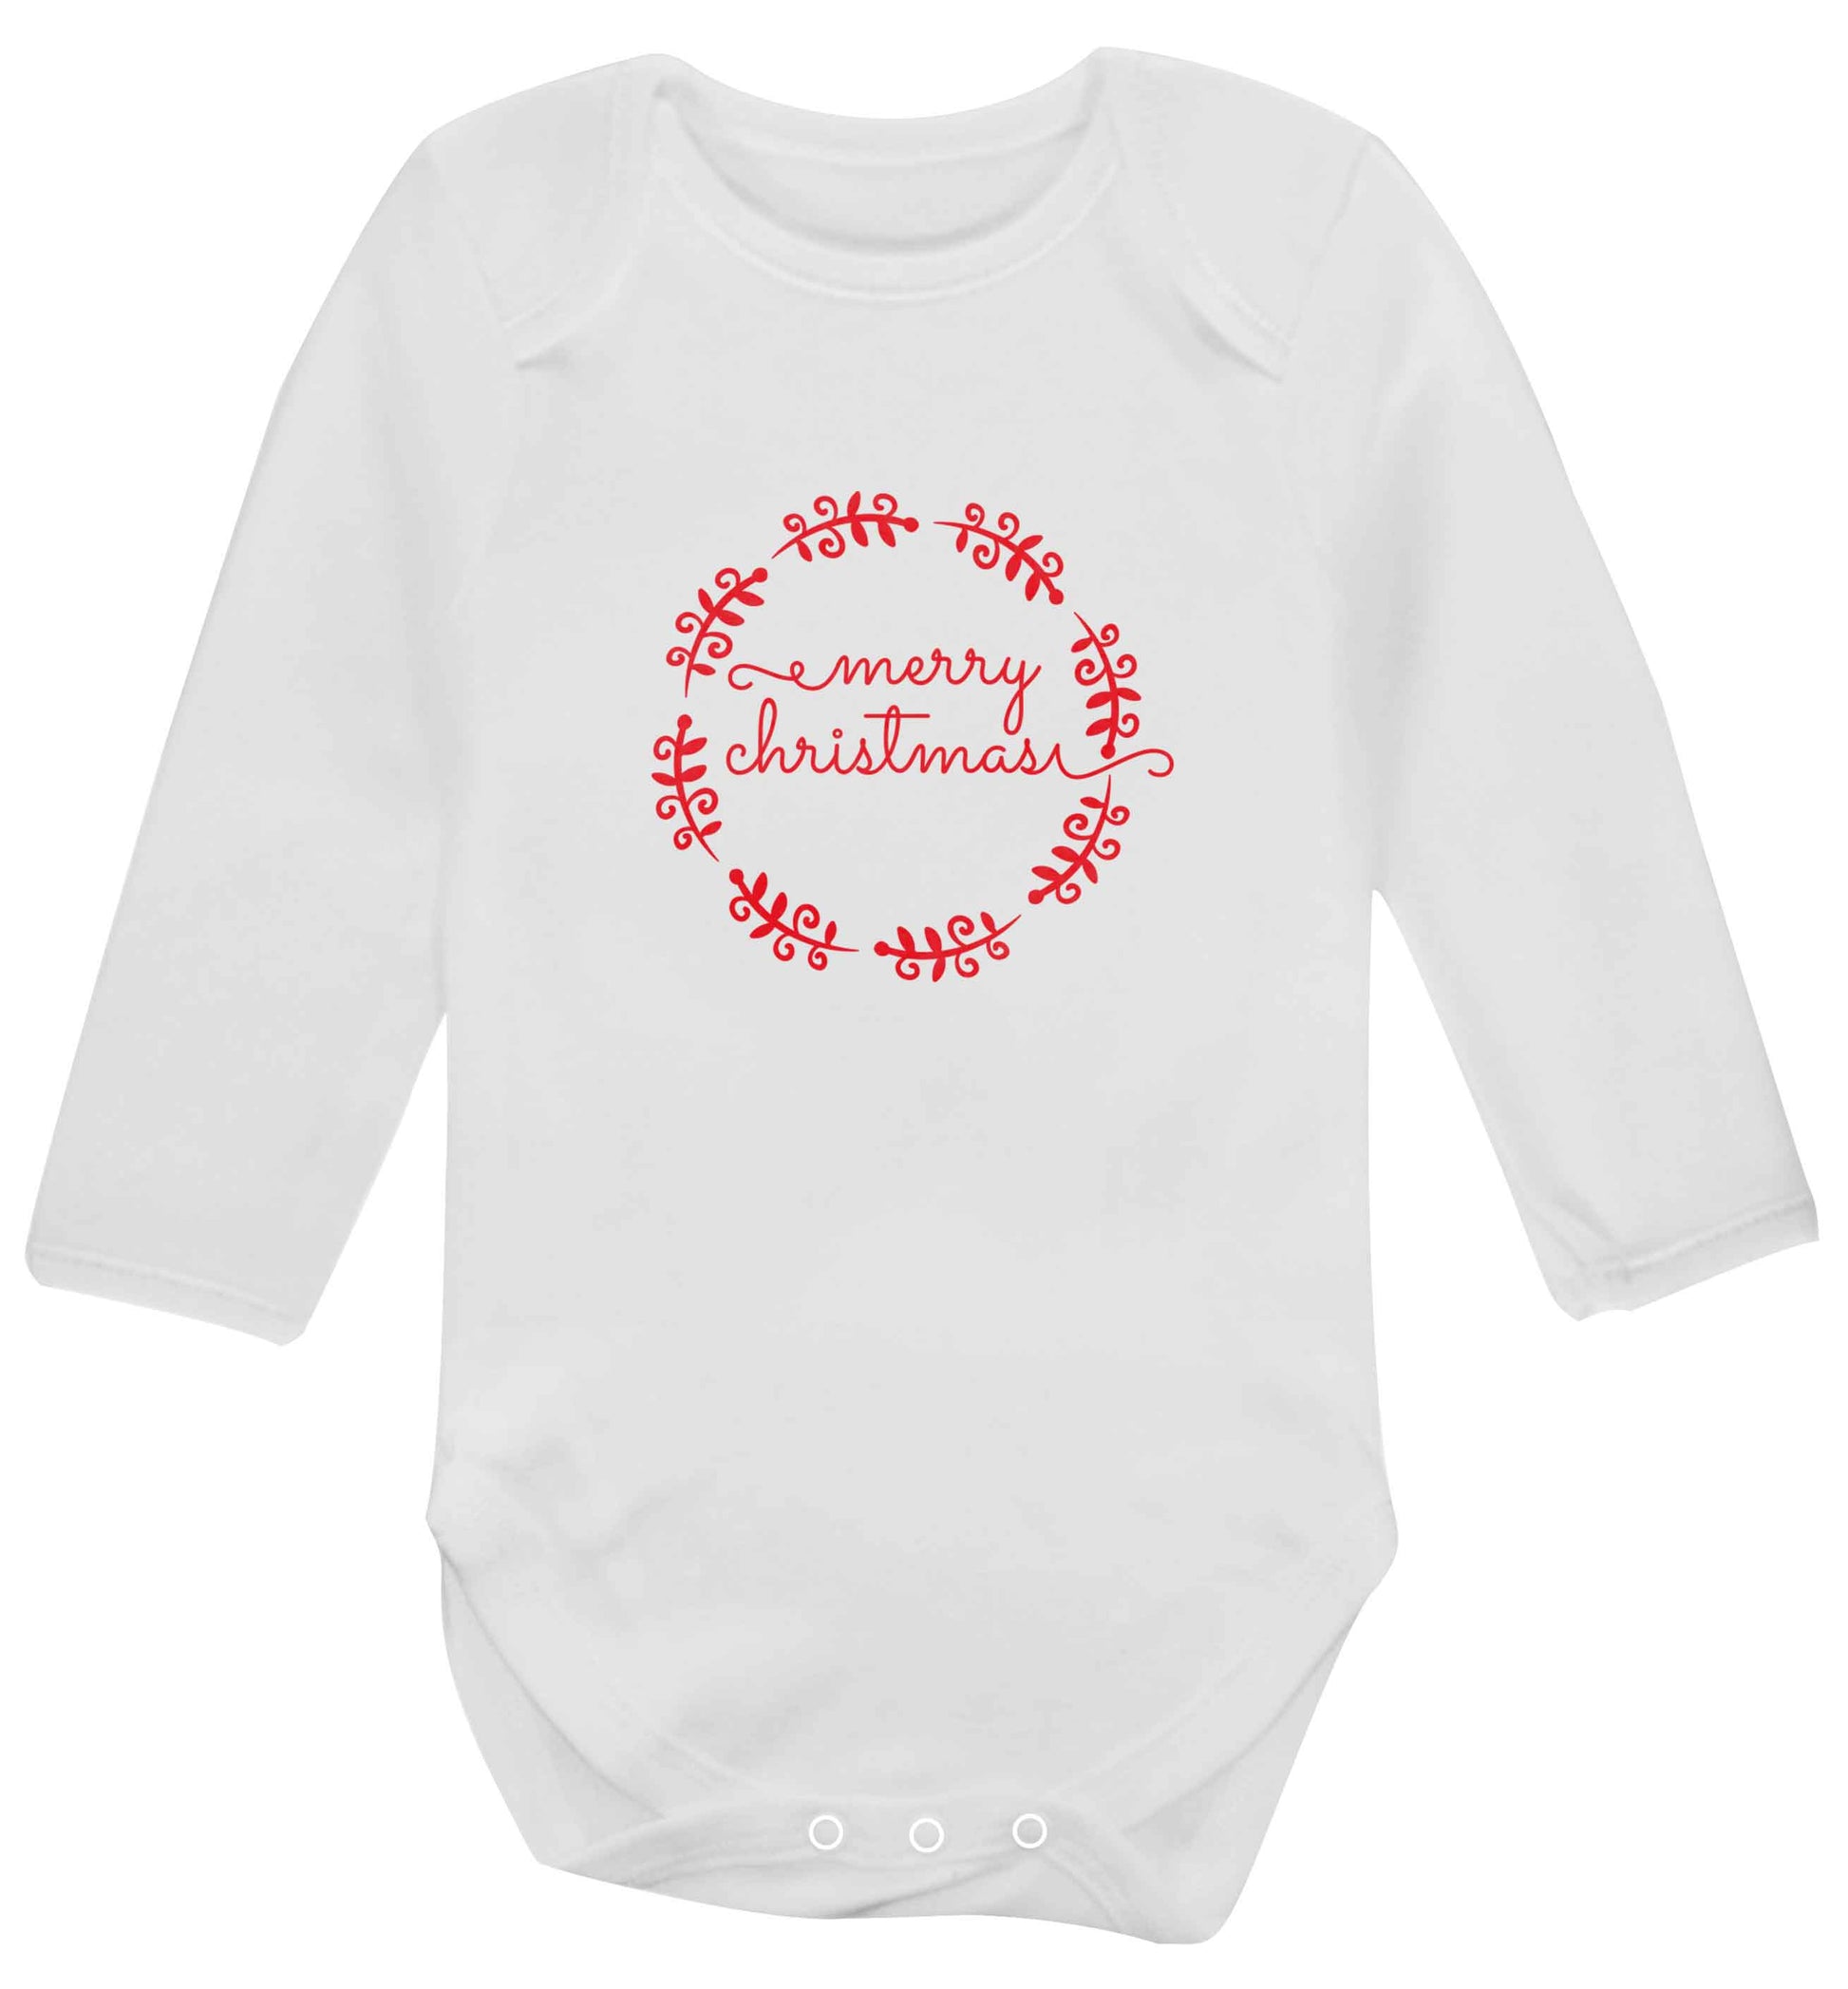 Merry christmas baby vest long sleeved white 6-12 months